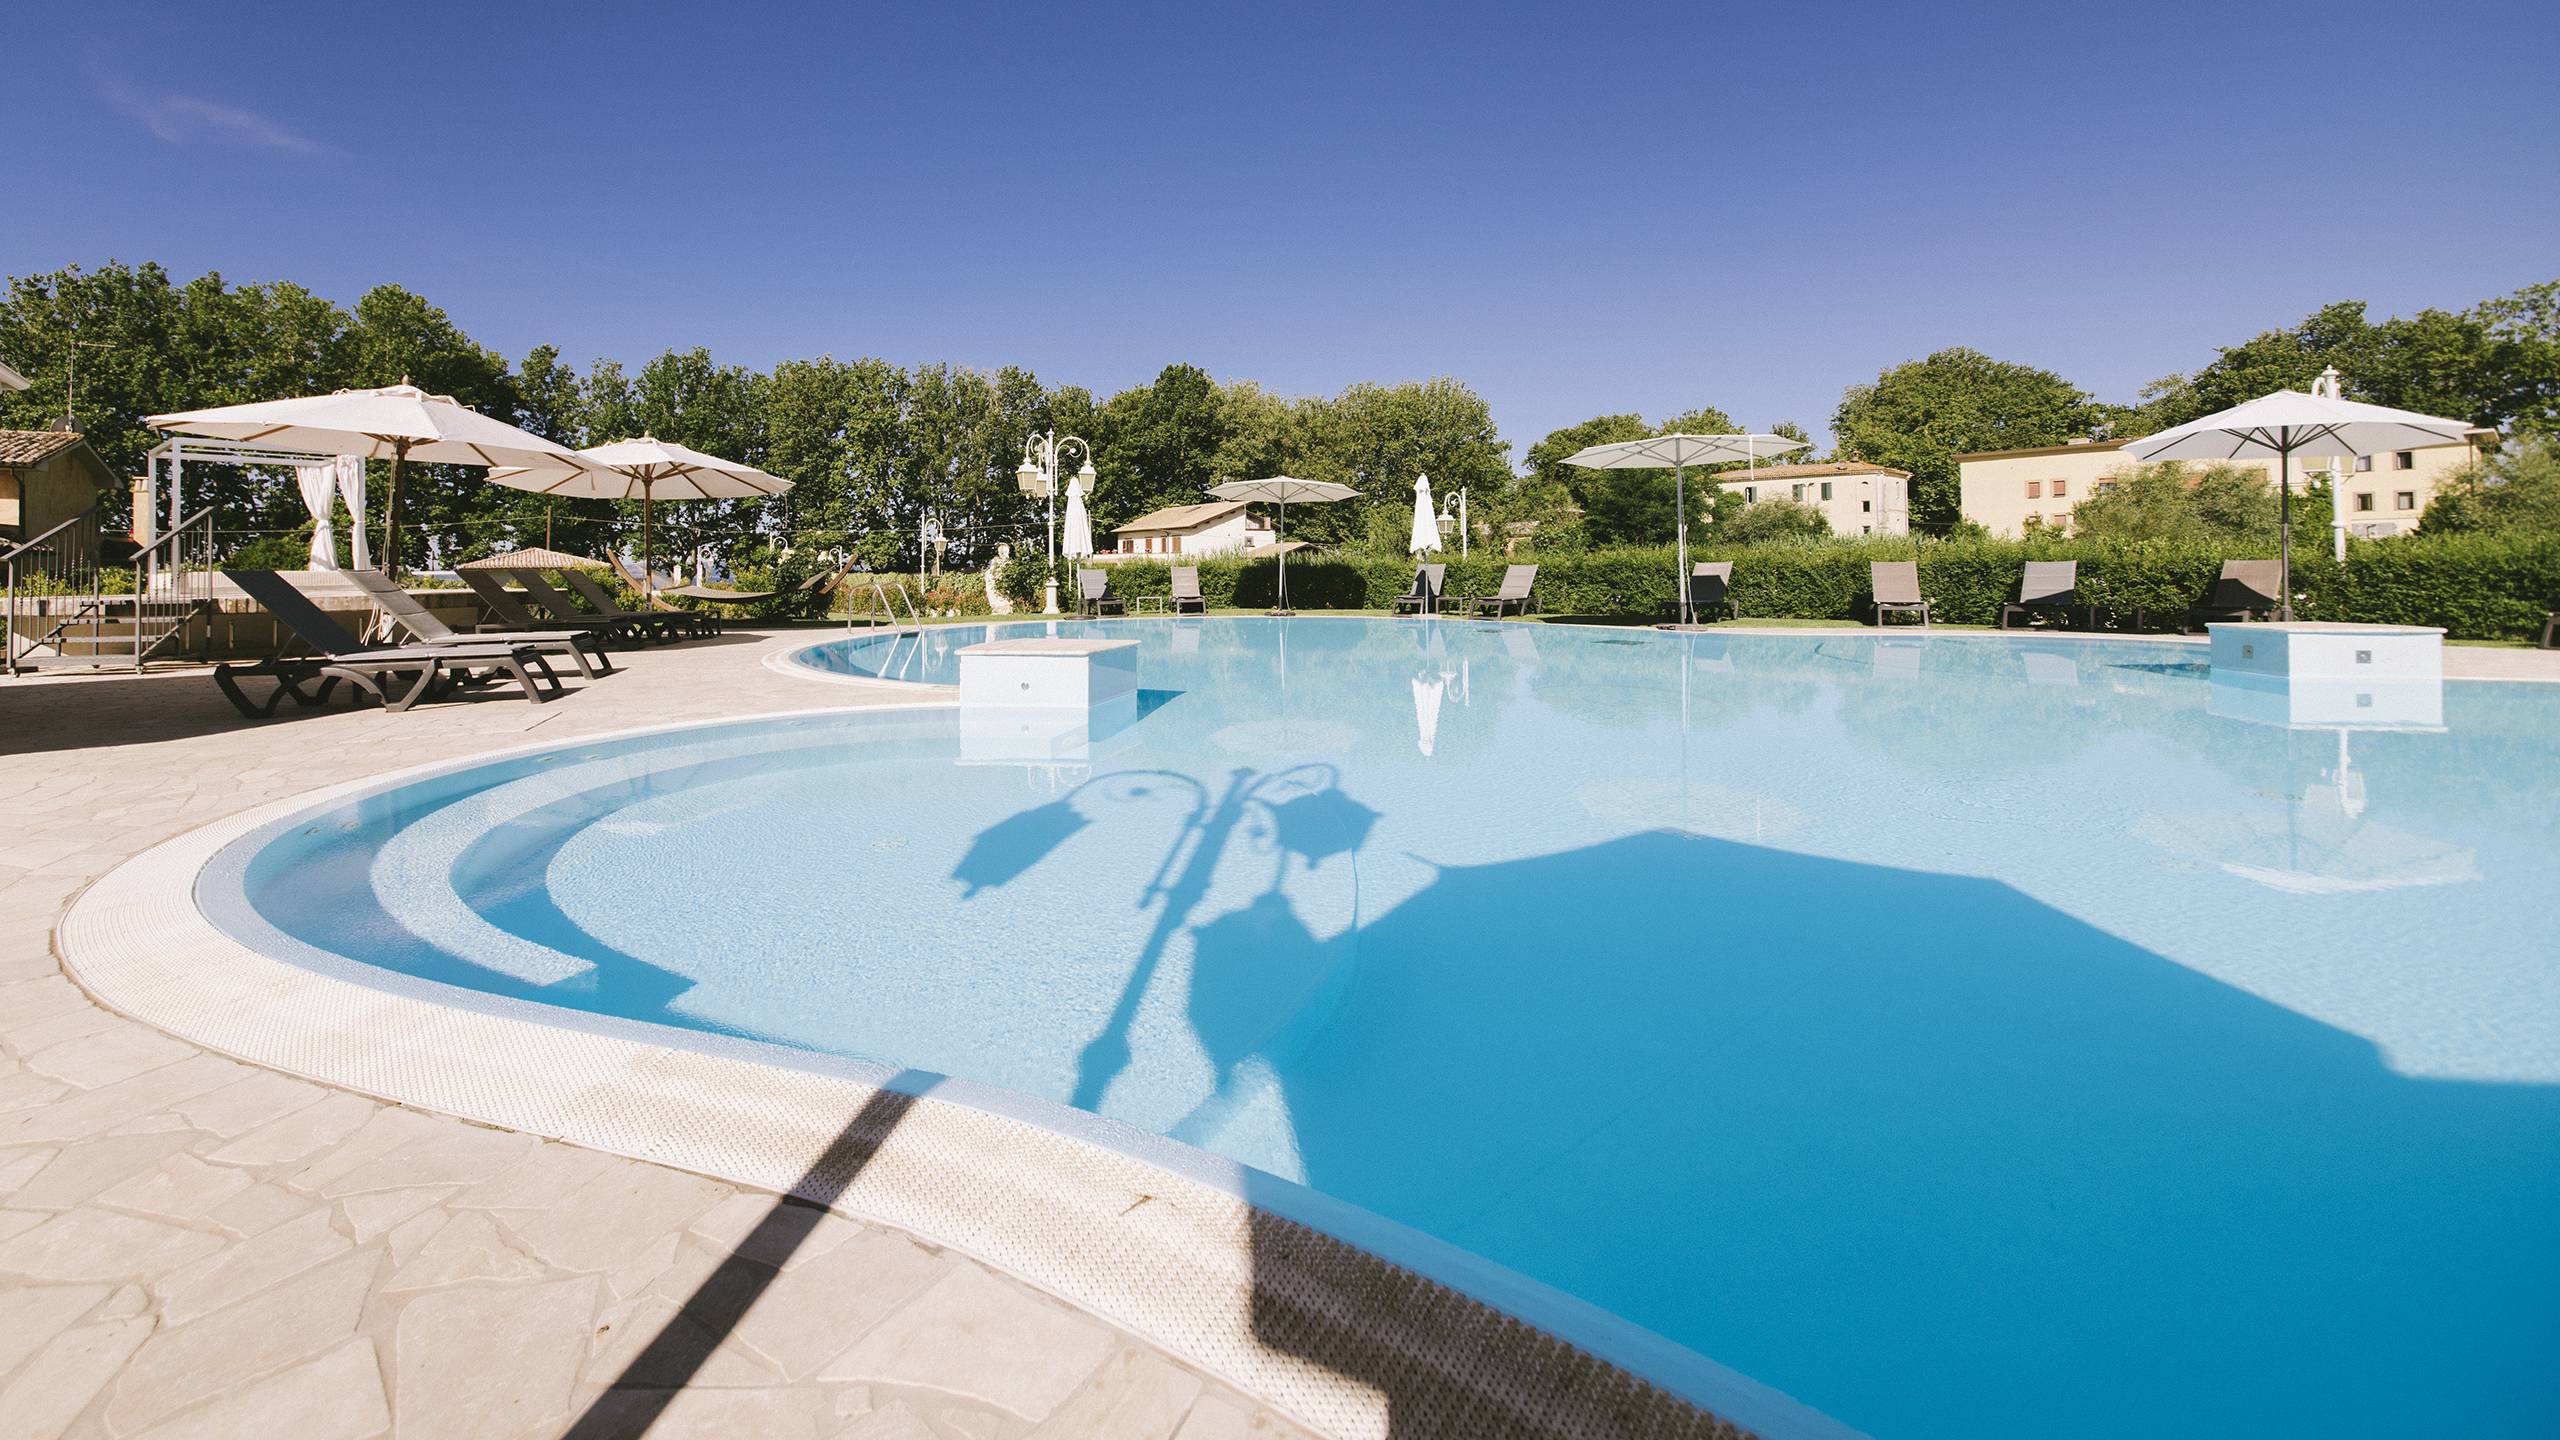 Ludwig-Boutique-Hotel-Bolsena-outdoor-swimming-pool-1-3